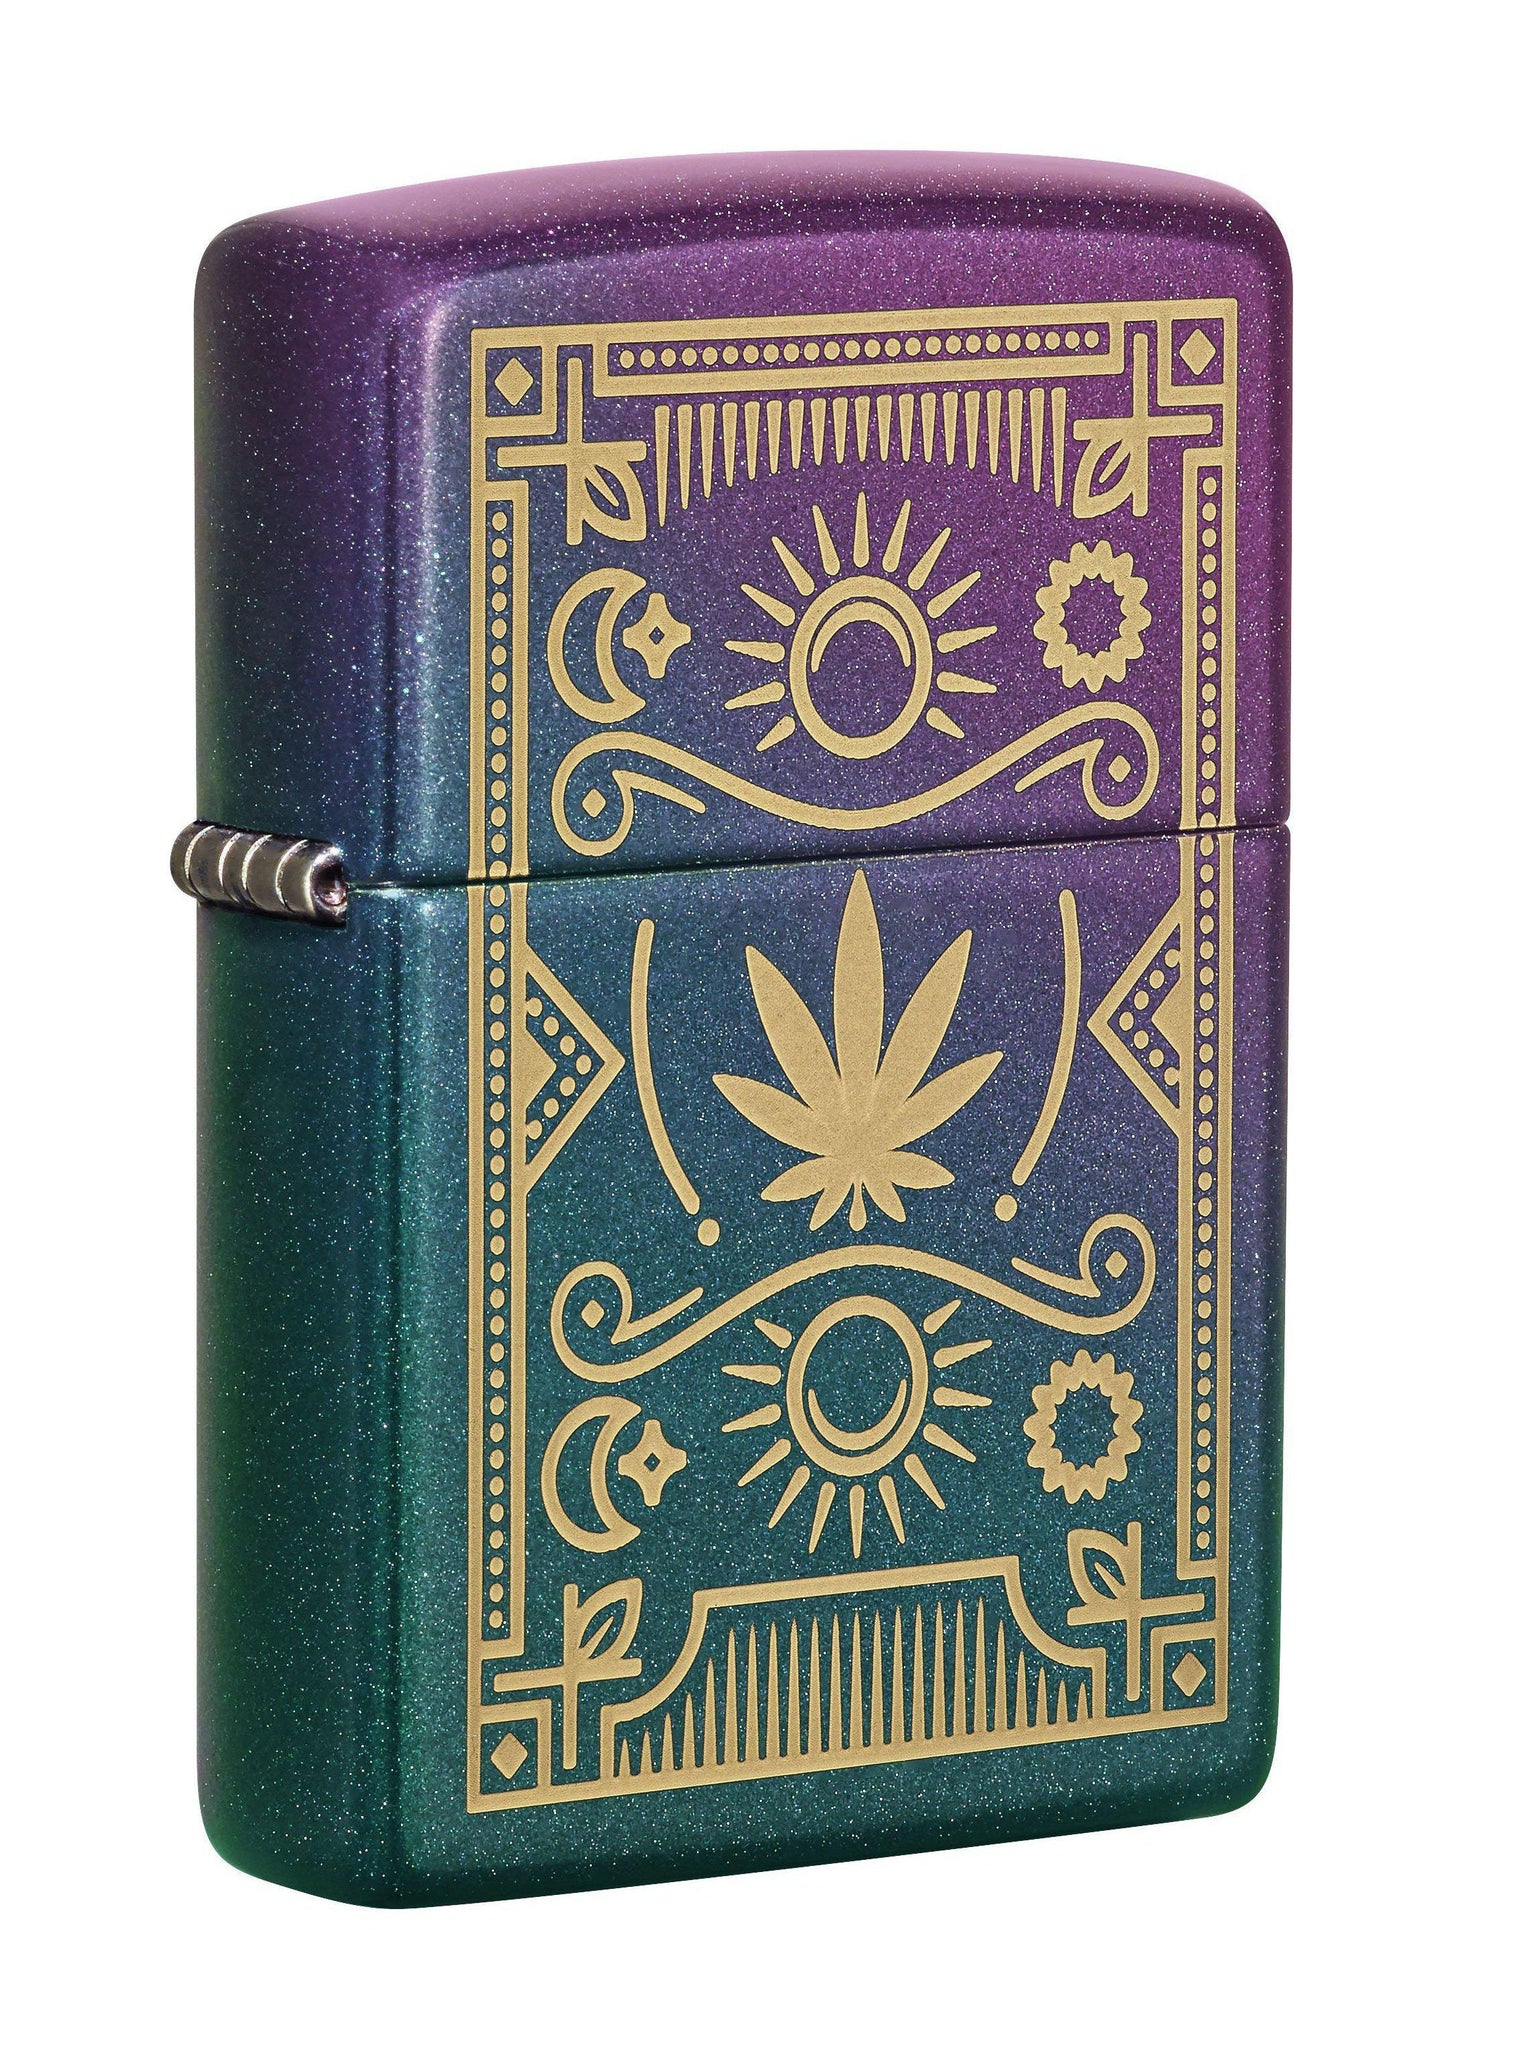 Zippo Lighter: Weed Leaf and Symbols, Engraved - Iridescent 49516